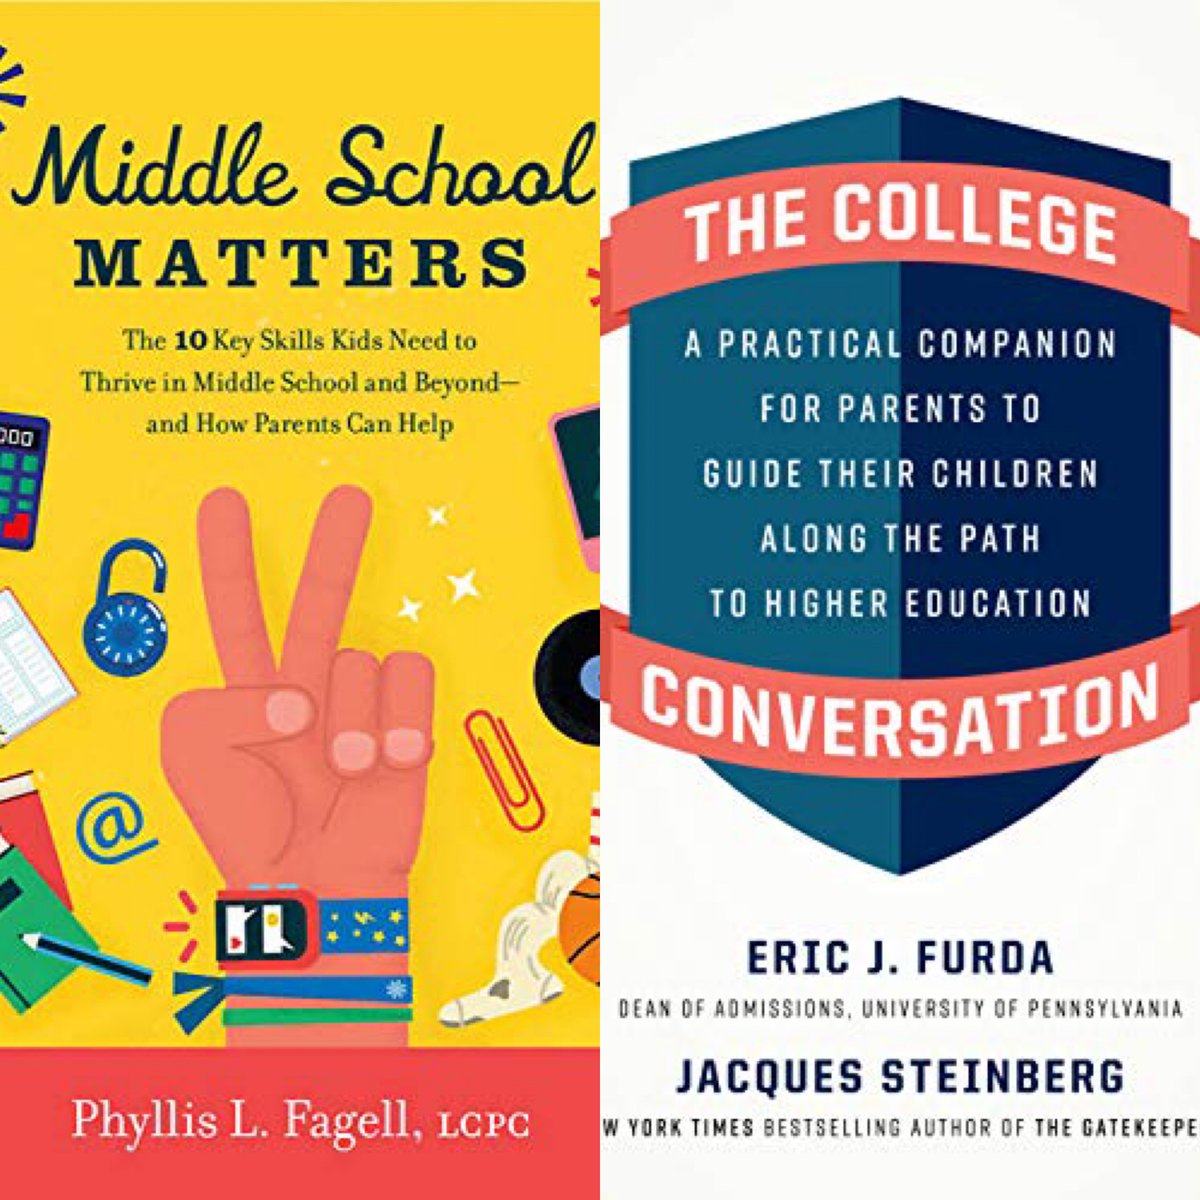 And featured books for #parents from @Pfagell  & college admission experts @DeanFurda  & @JacquesCollege